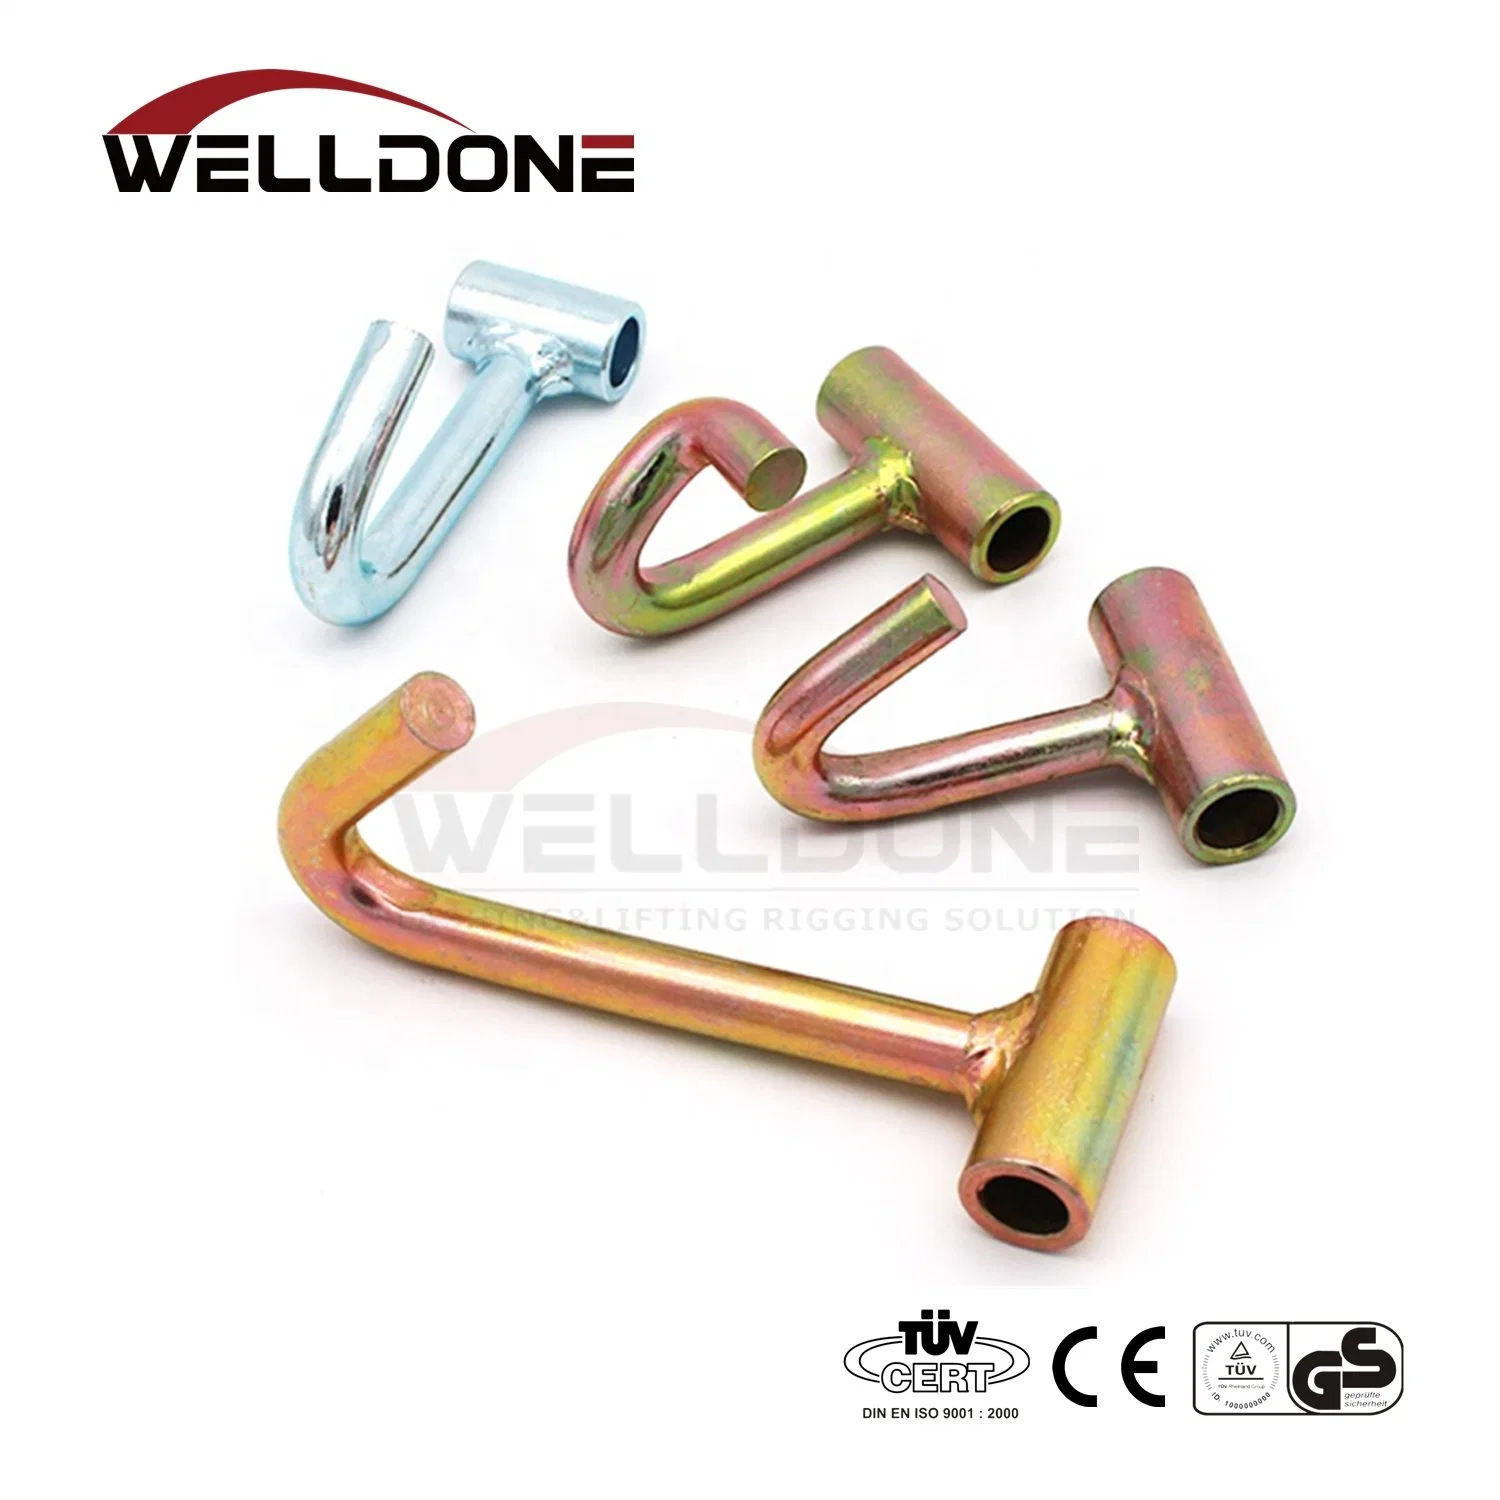 Zinc Galvanized Rotated Wire Hook with Welded Tube